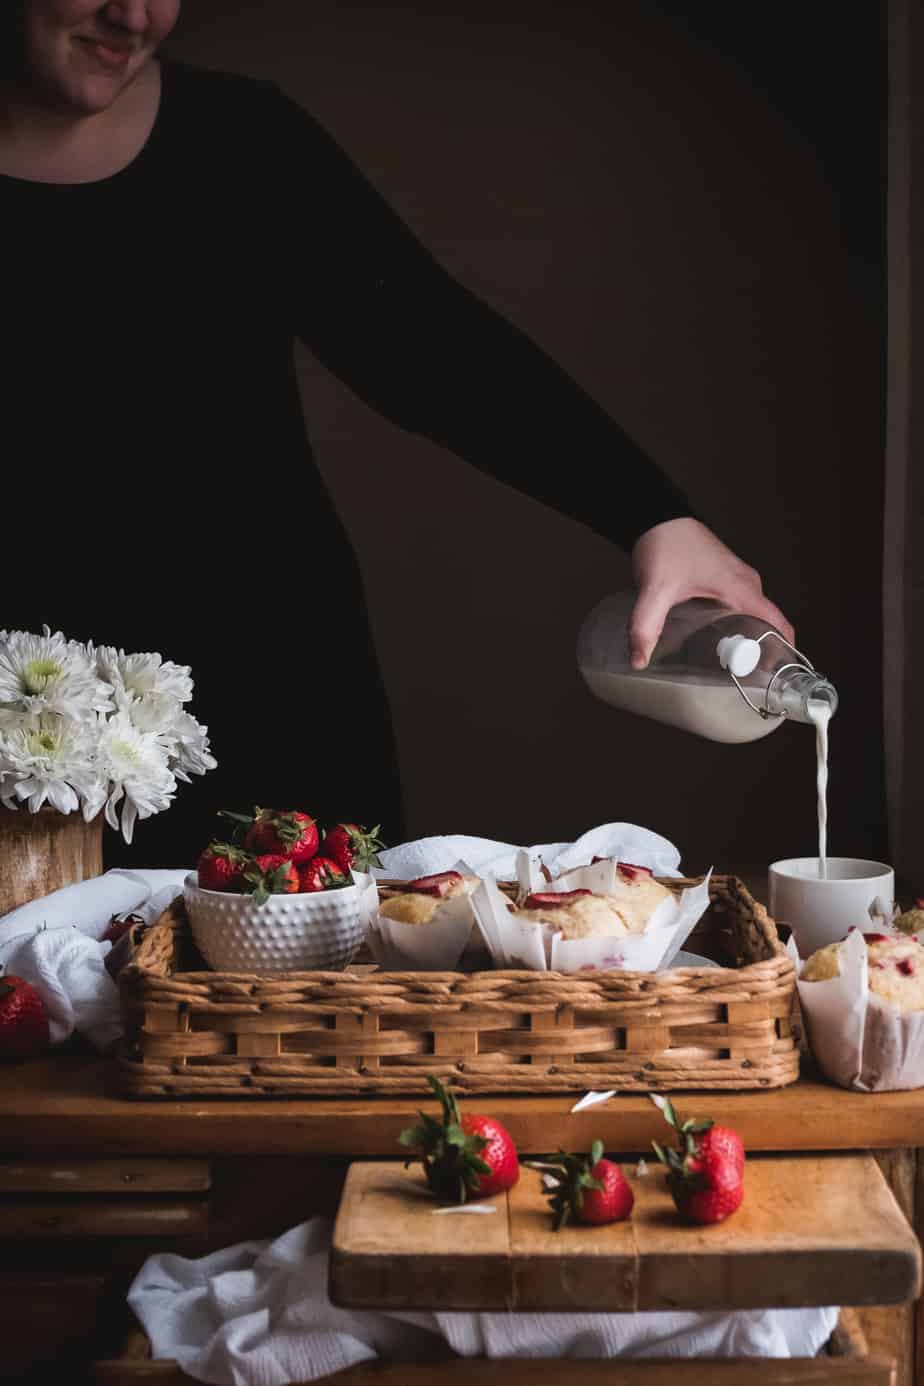 woman pouring milk into cup next to tray of muffins and strawberries